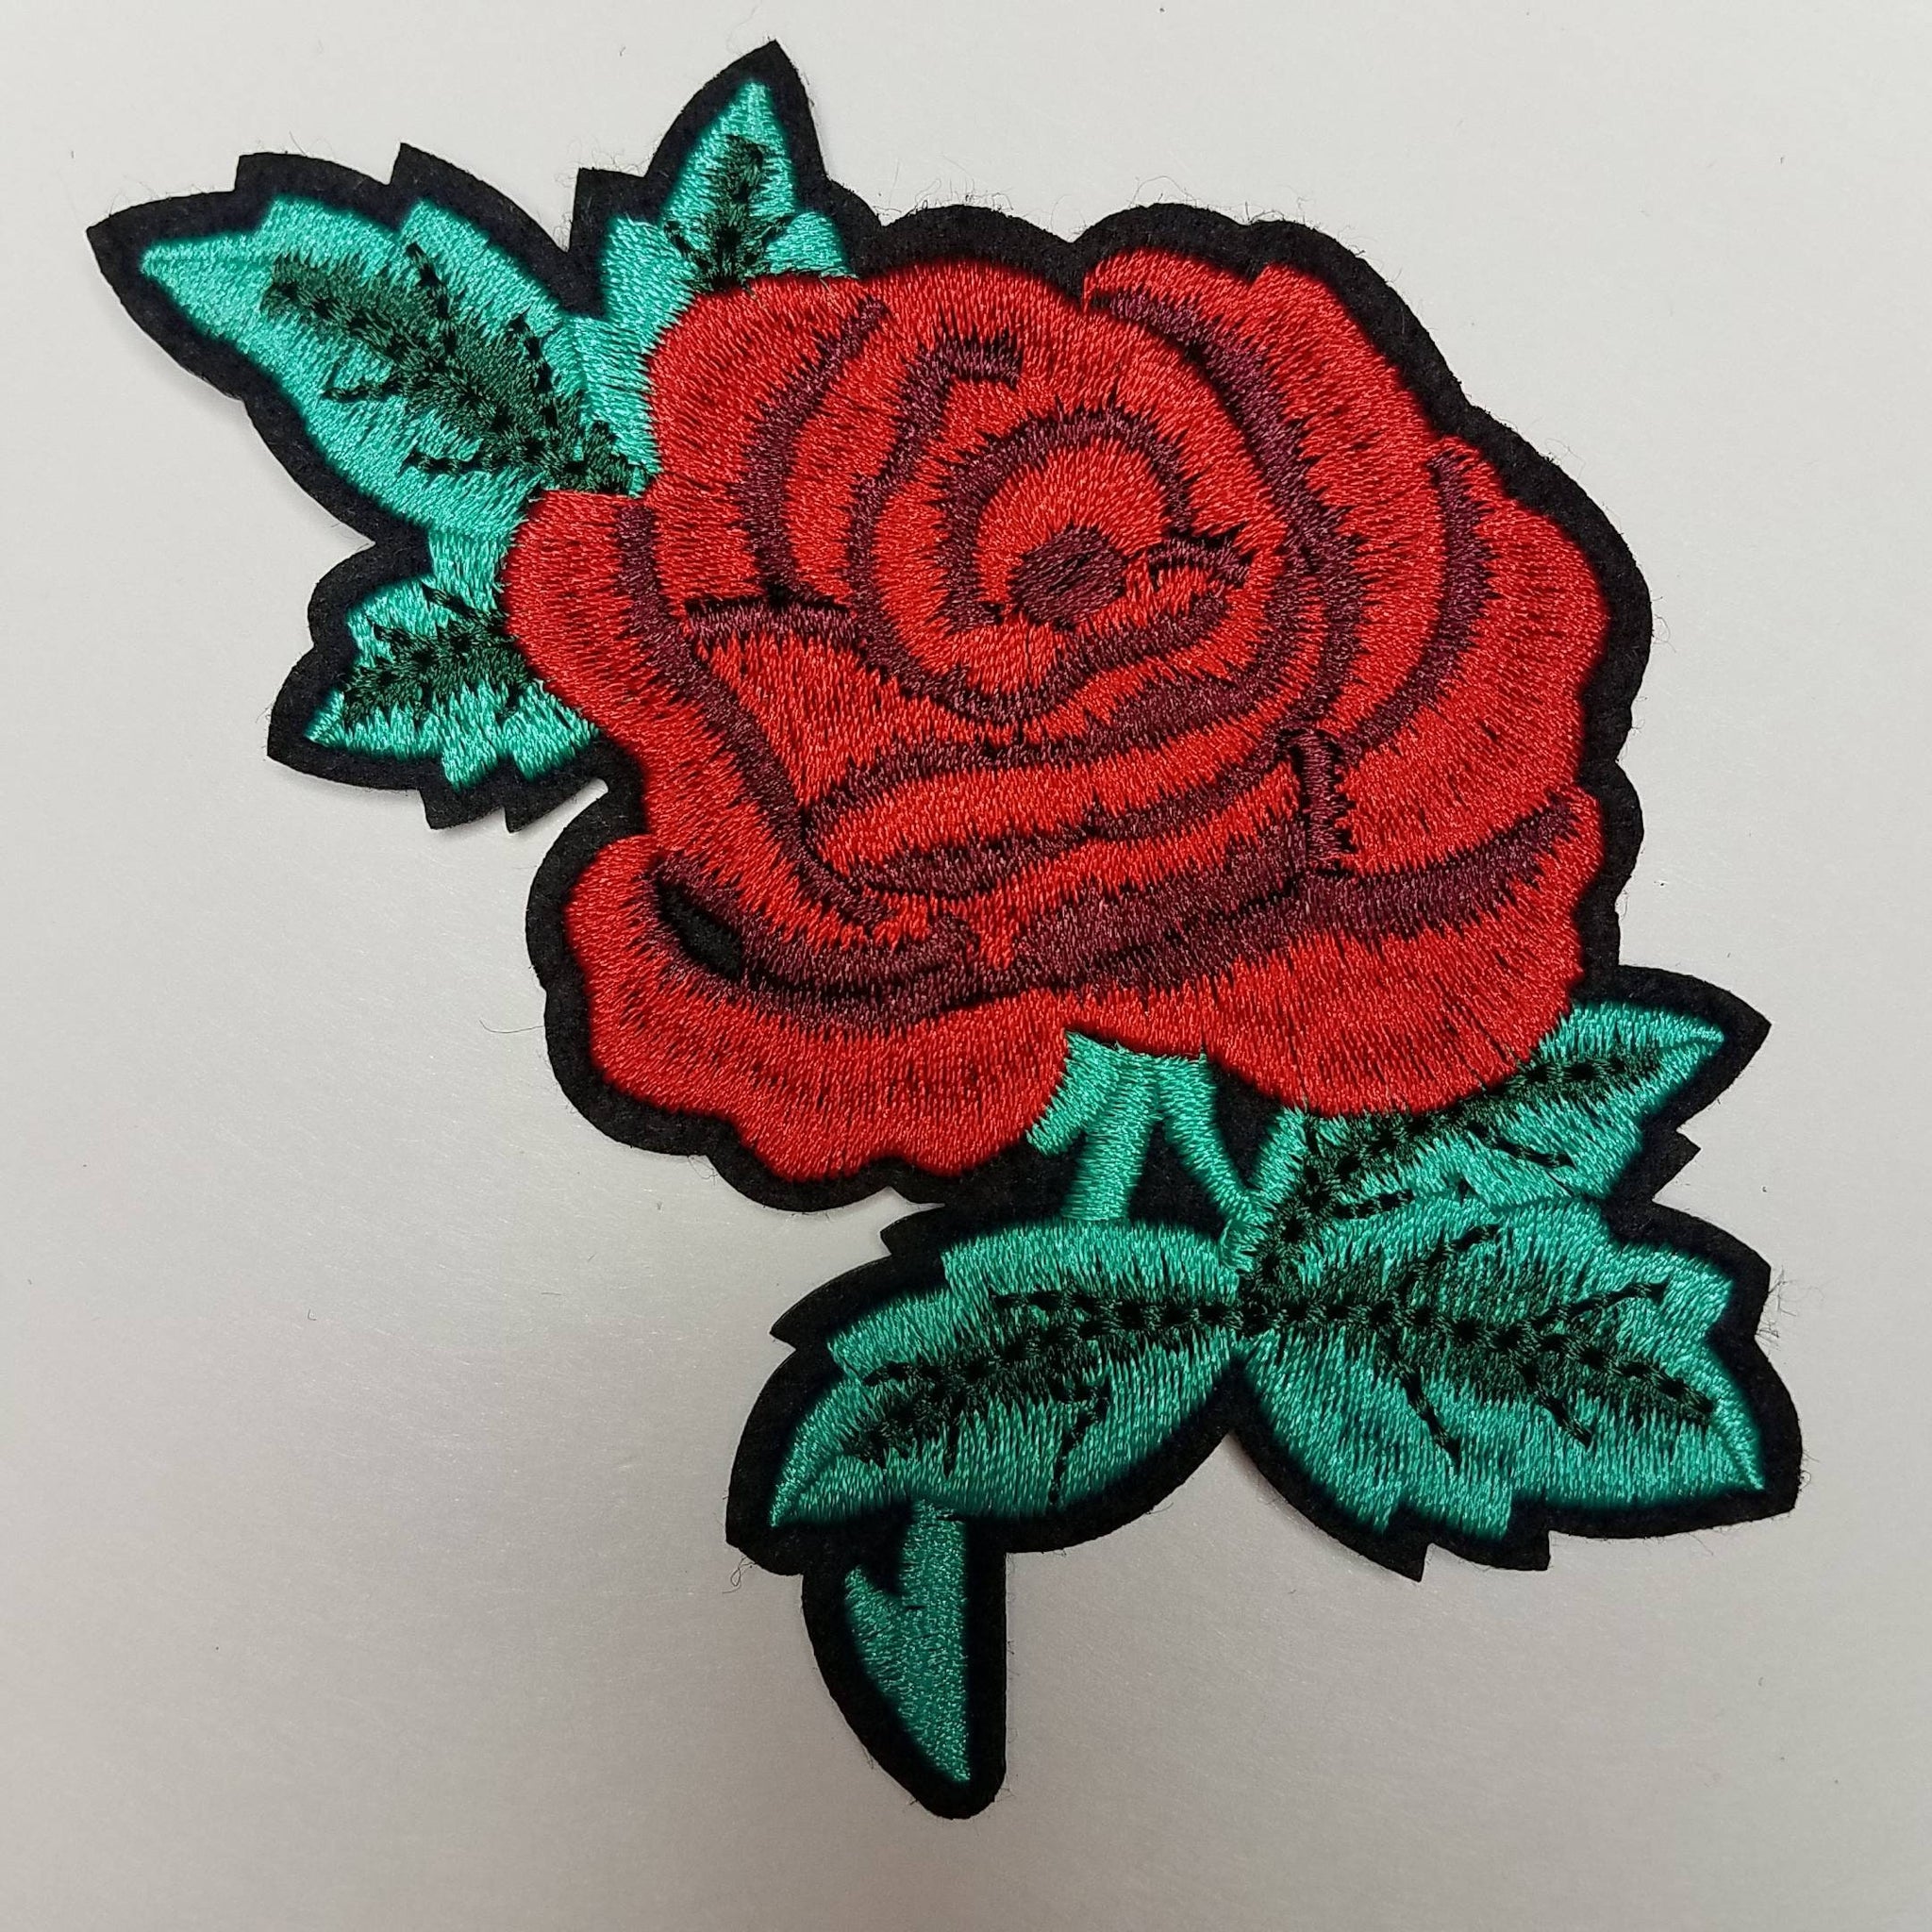 Rosettes, 2 pc Rosebud set, with teal stems  (size 3-inches), matching embroidered iron-on floral patches, Flower Patches, Rose Embroider